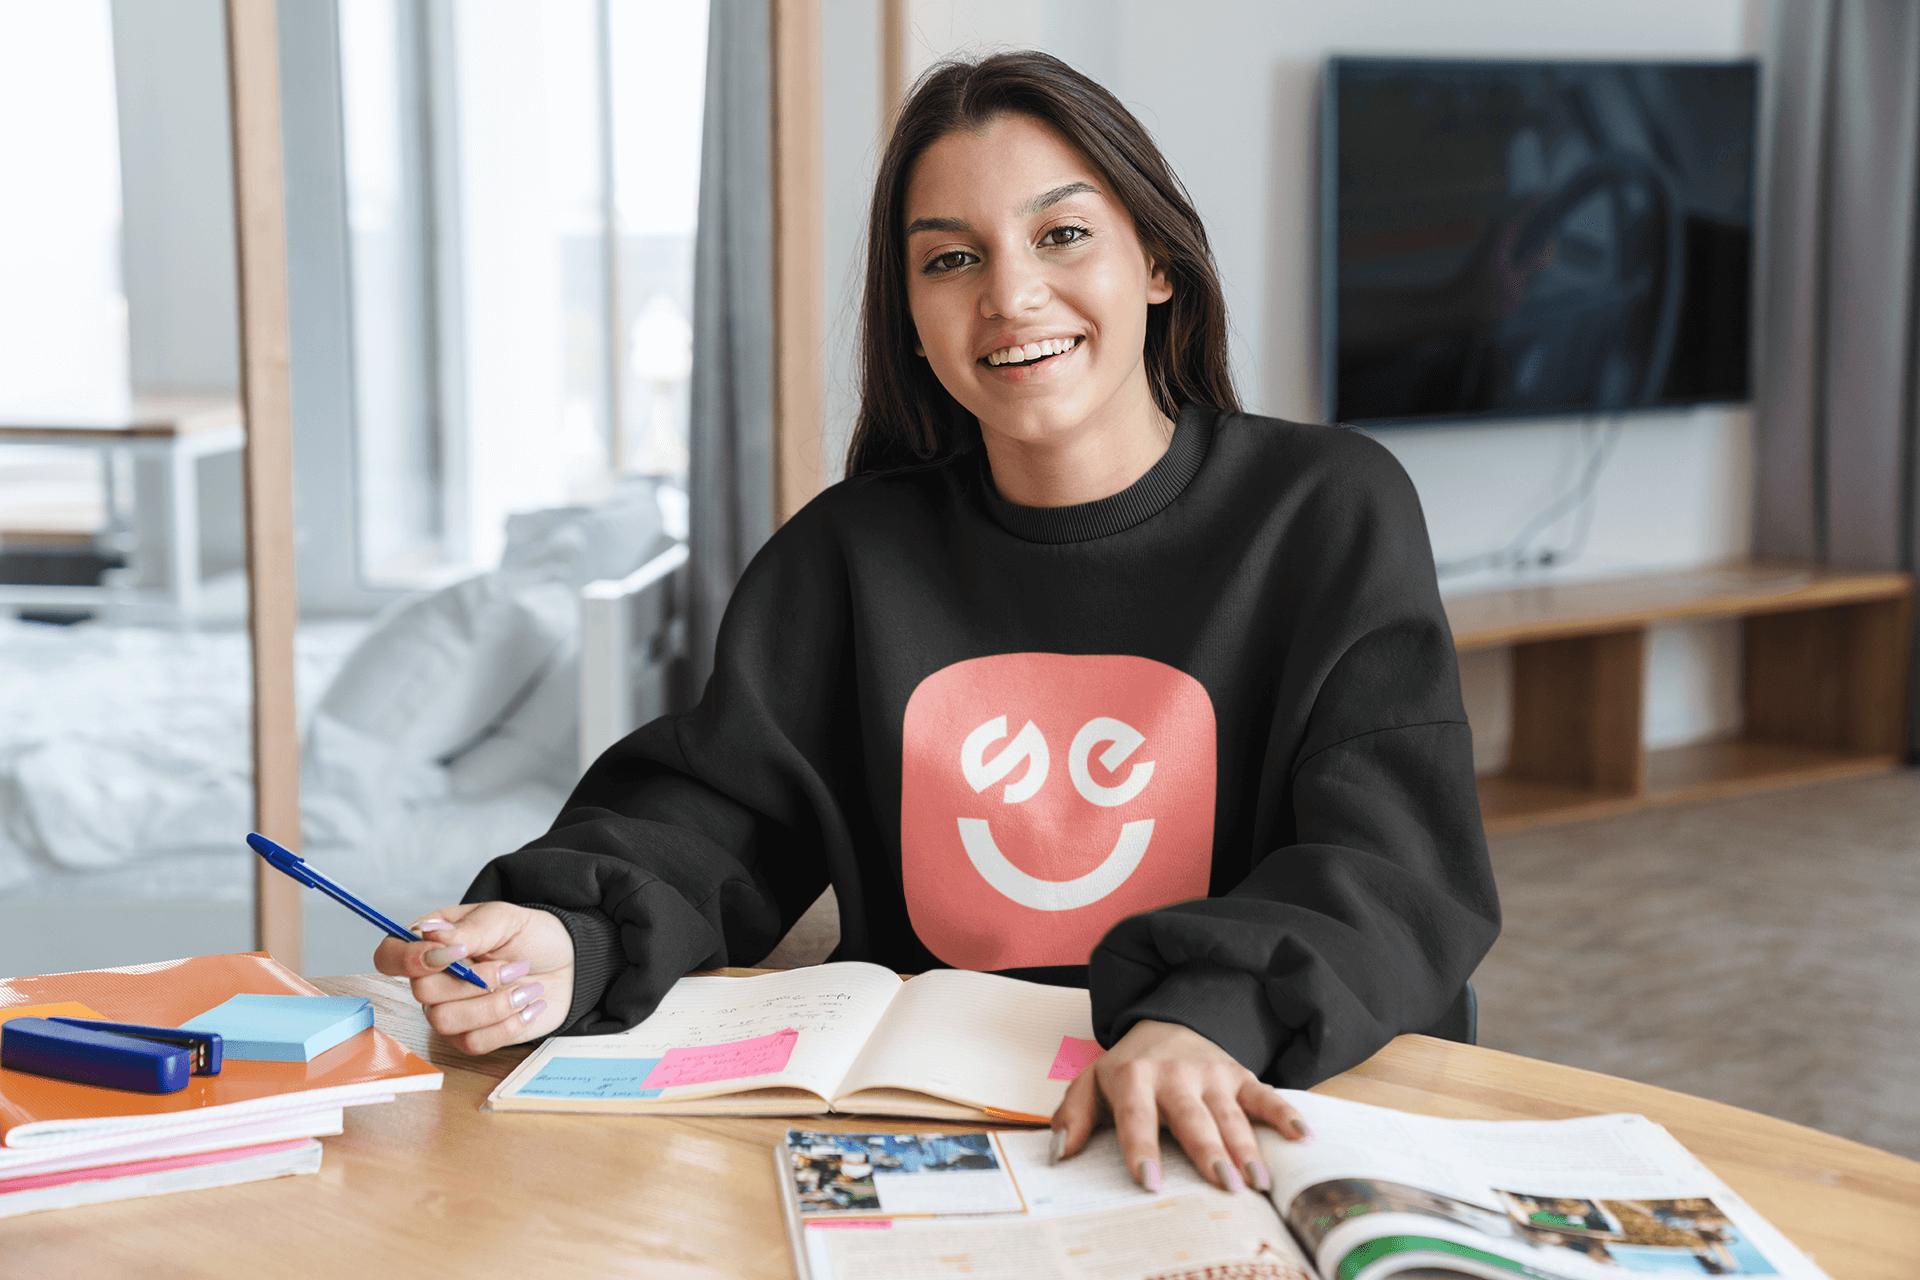 sweatshirt-mockup-featuring-a-young-happy-woman-studying-at-home-40484-r-el2